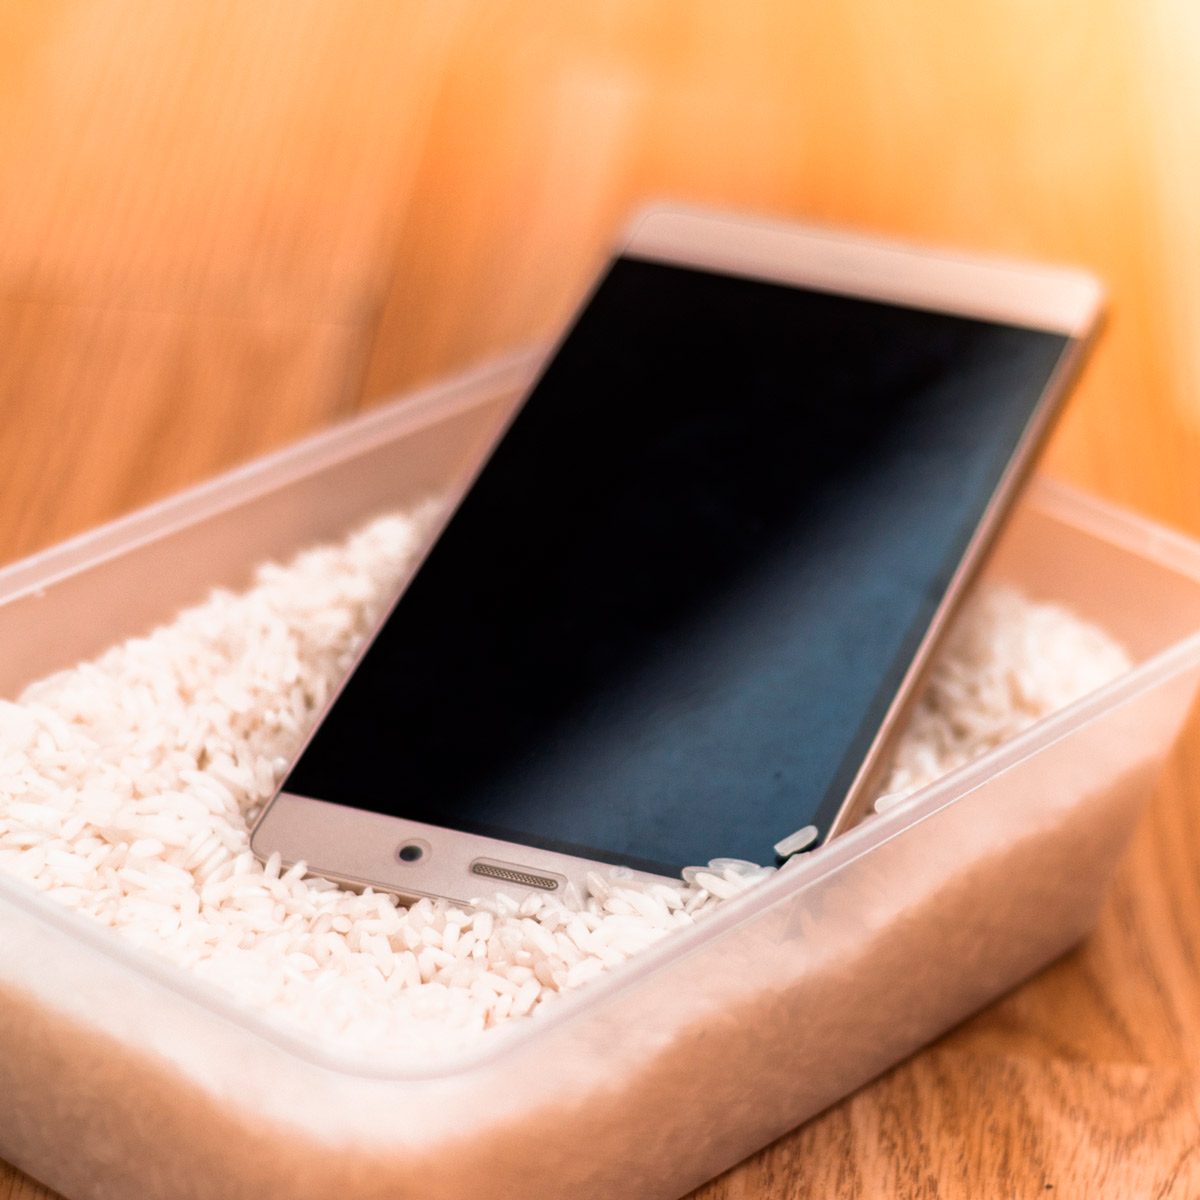  Why You Shouldnt Put a Soaked Phone In Rice (And What to Do Instead)